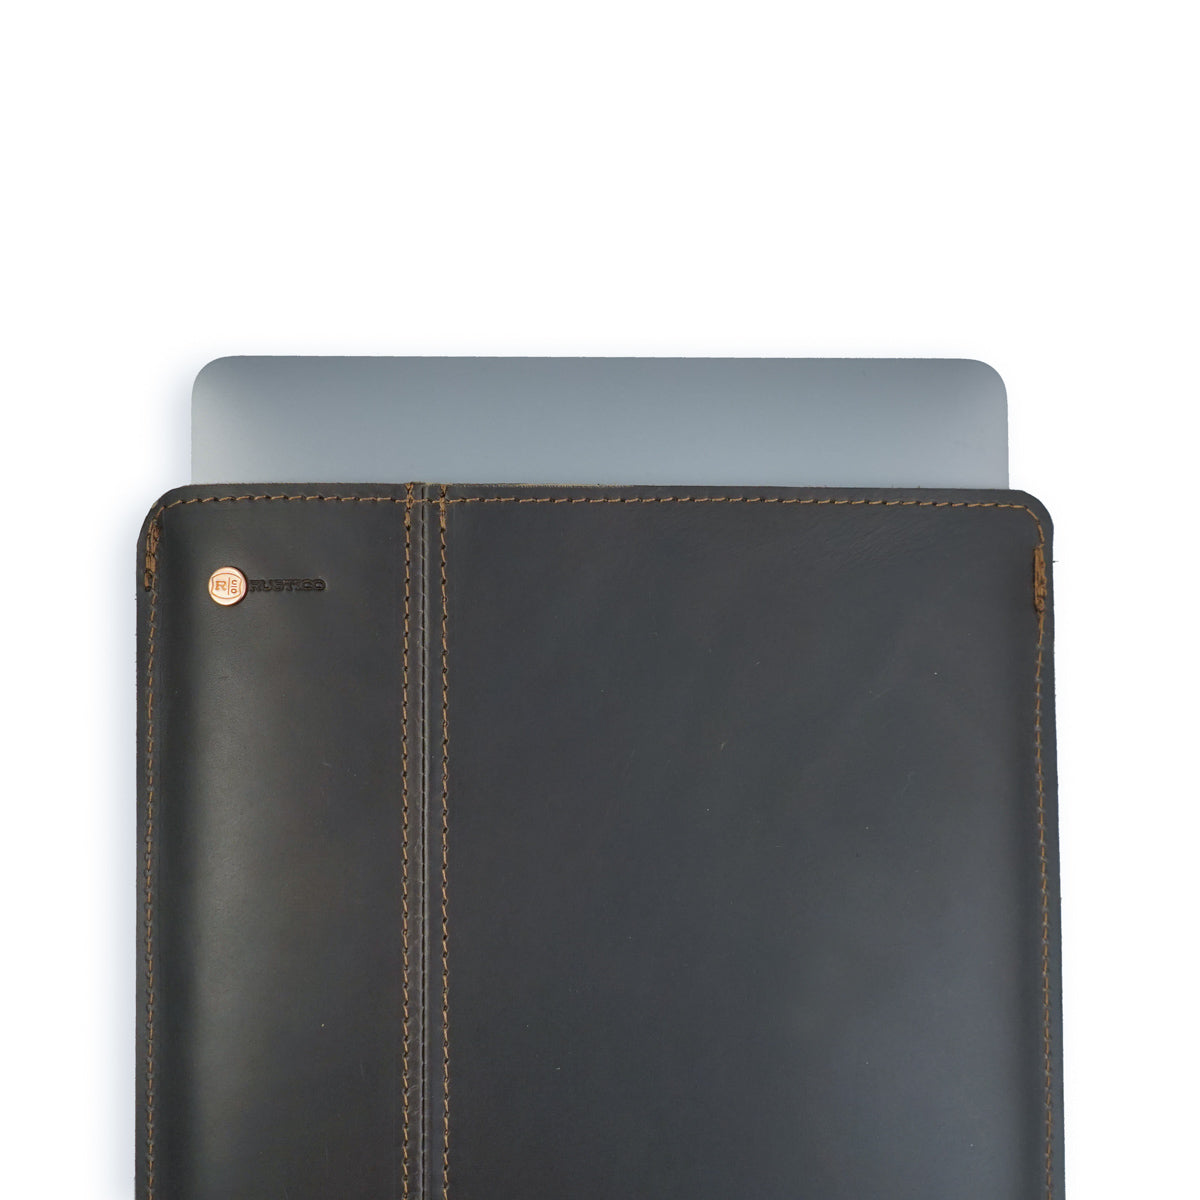 Leather Laptop Sleeve for MacBook